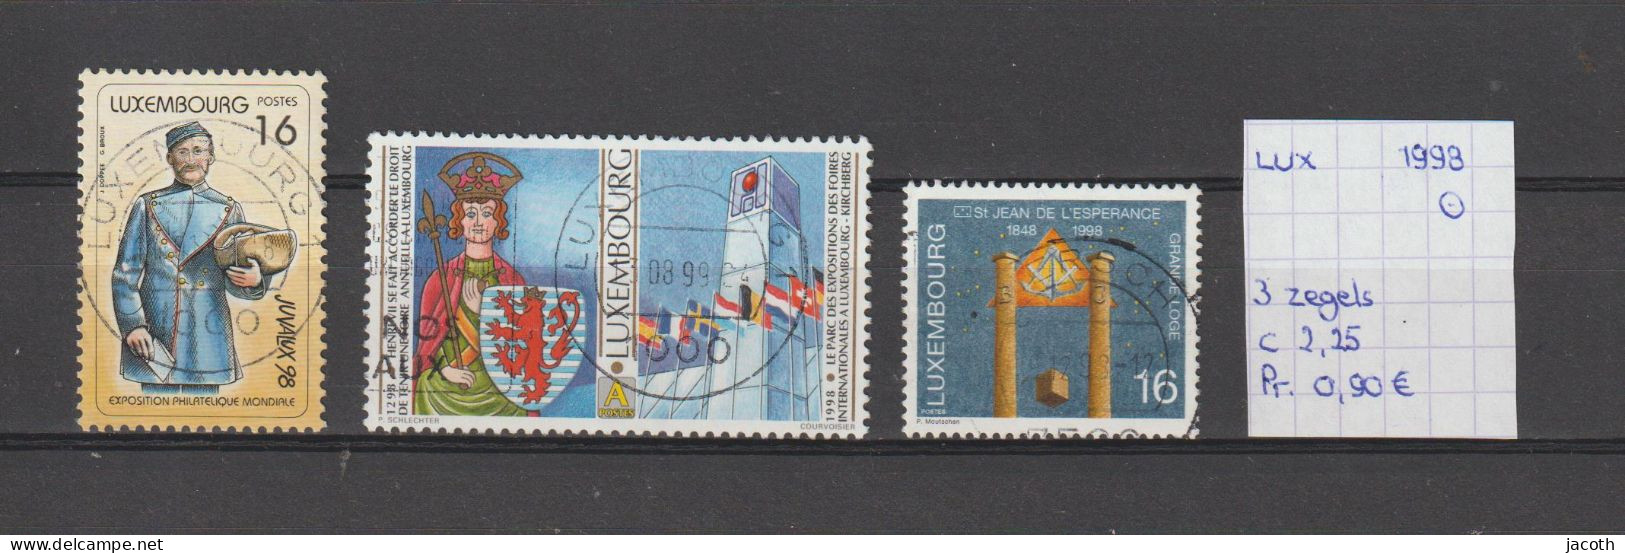 (TJ) Luxembourg 1998 - 3 Zegels (gest./obl./used) - Used Stamps